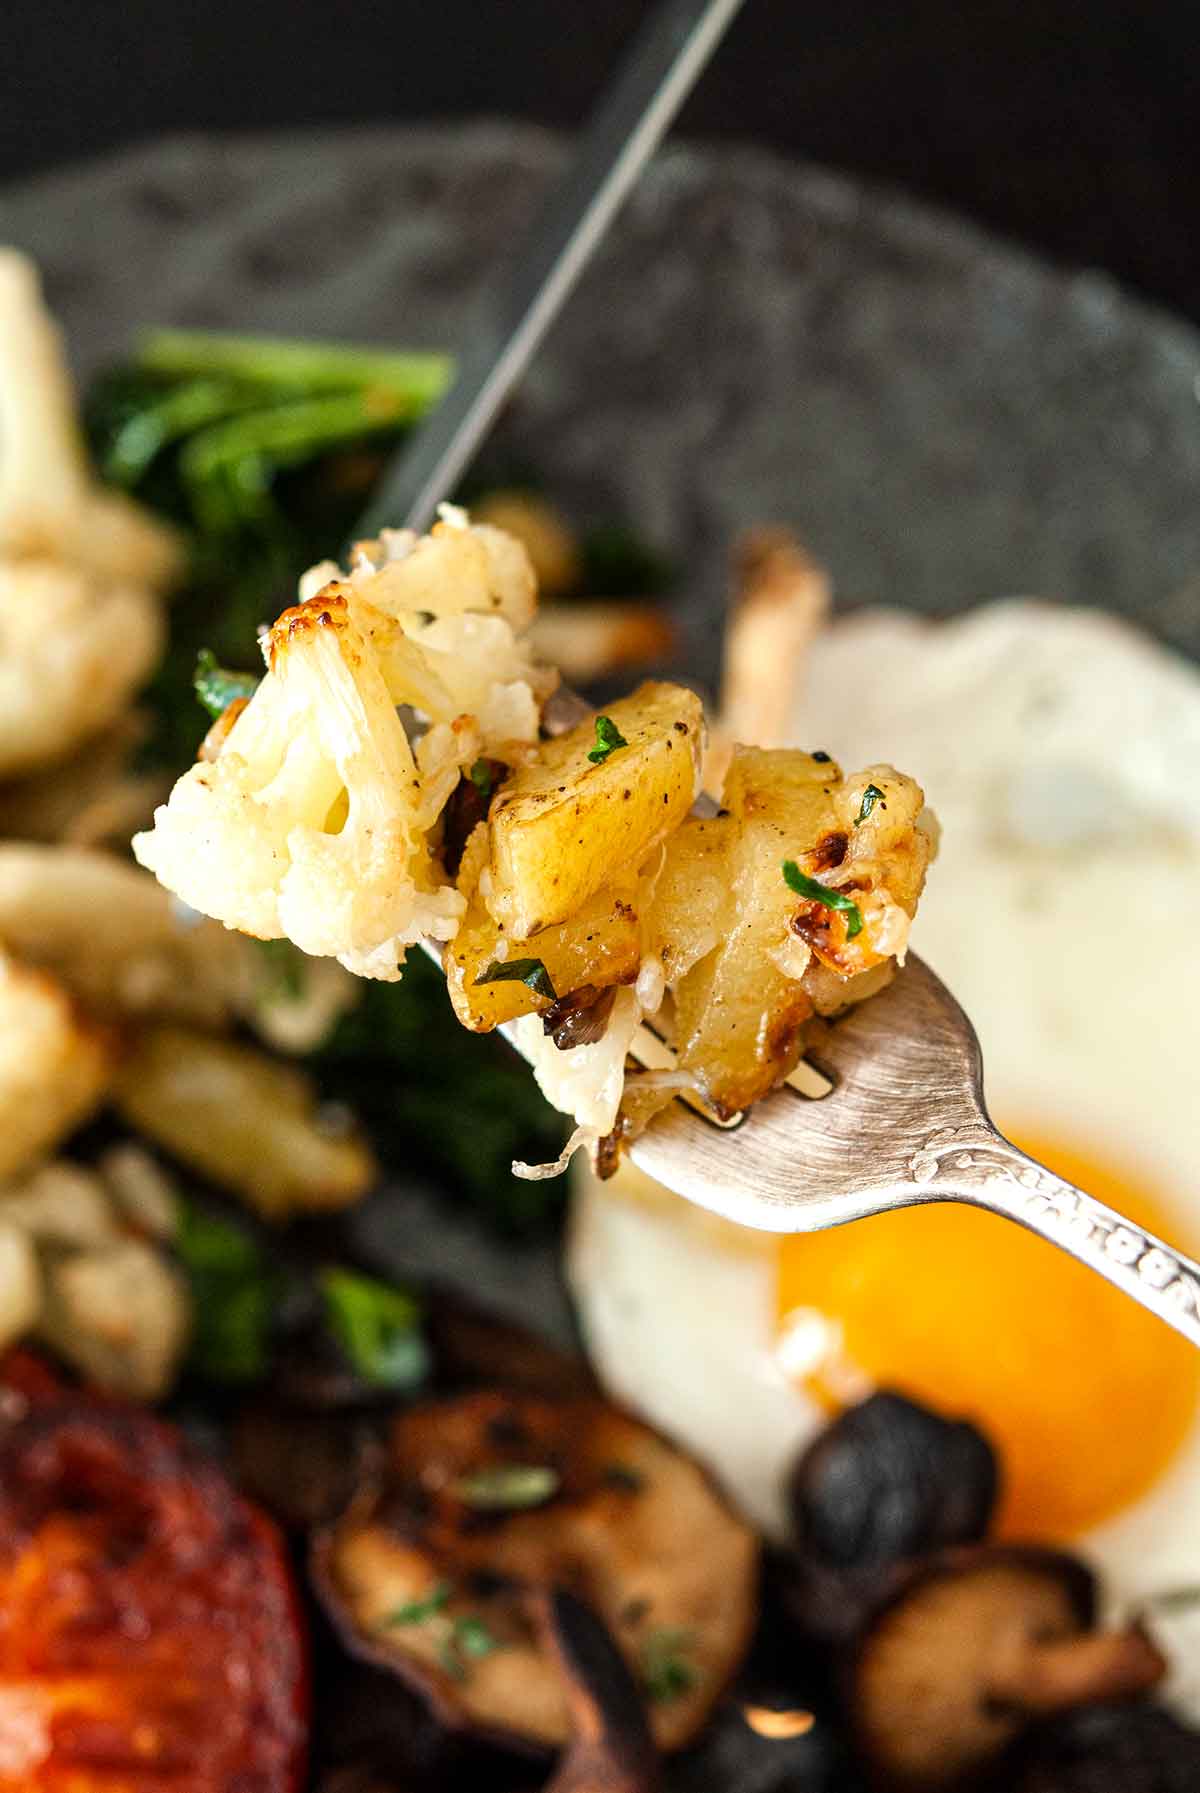 A fork full of potato-cauliflower hash, held above a plate of food.